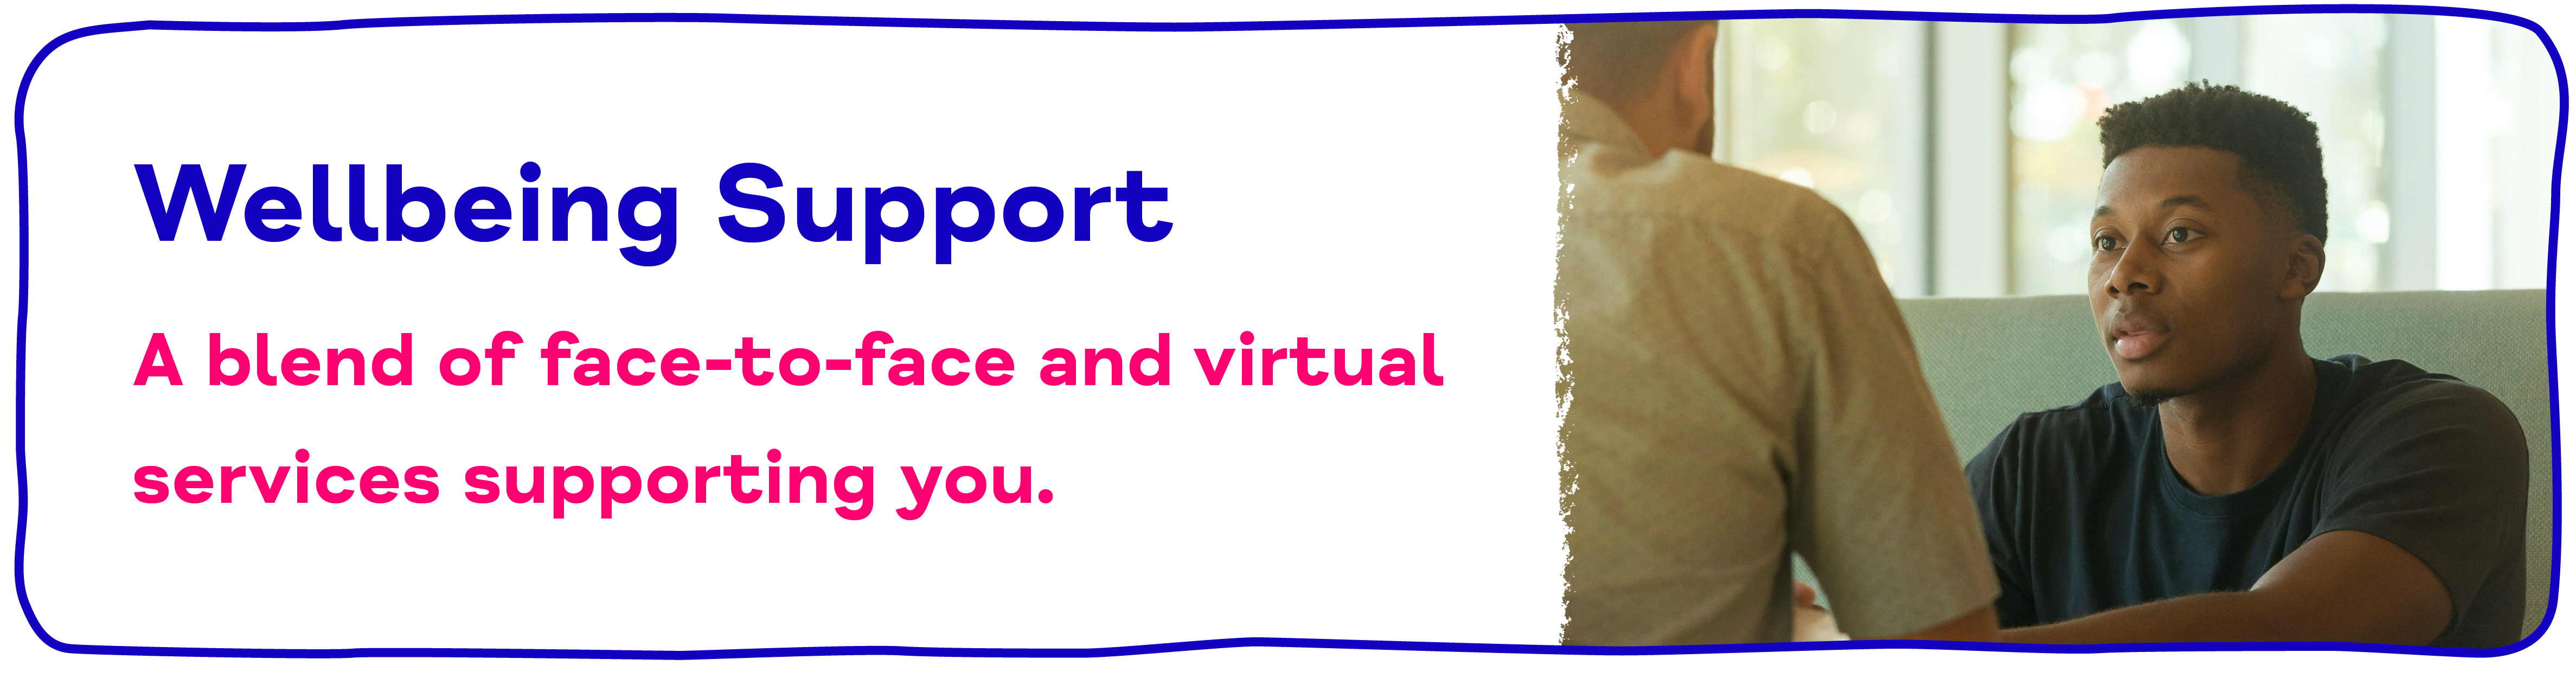 Wellbeing Support A blend of face-to-face and virtual services supporting you..